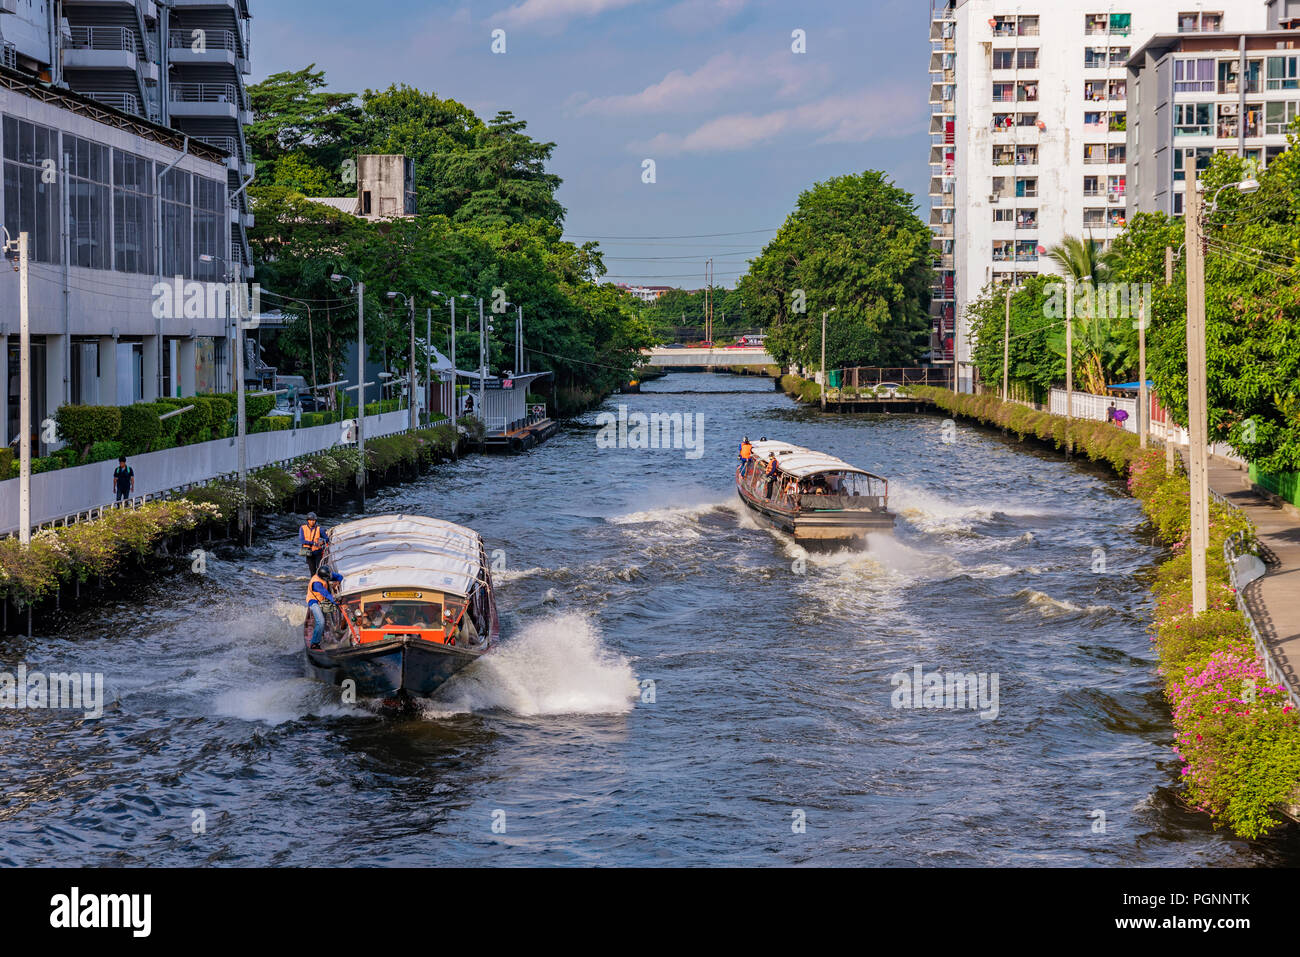 BANGKOK, THAILAND - JULY 05: This is a view of bus boats on a canal in the Bang  Kapi area on July 05, 2018 in Bangkok Stock Photo - Alamy